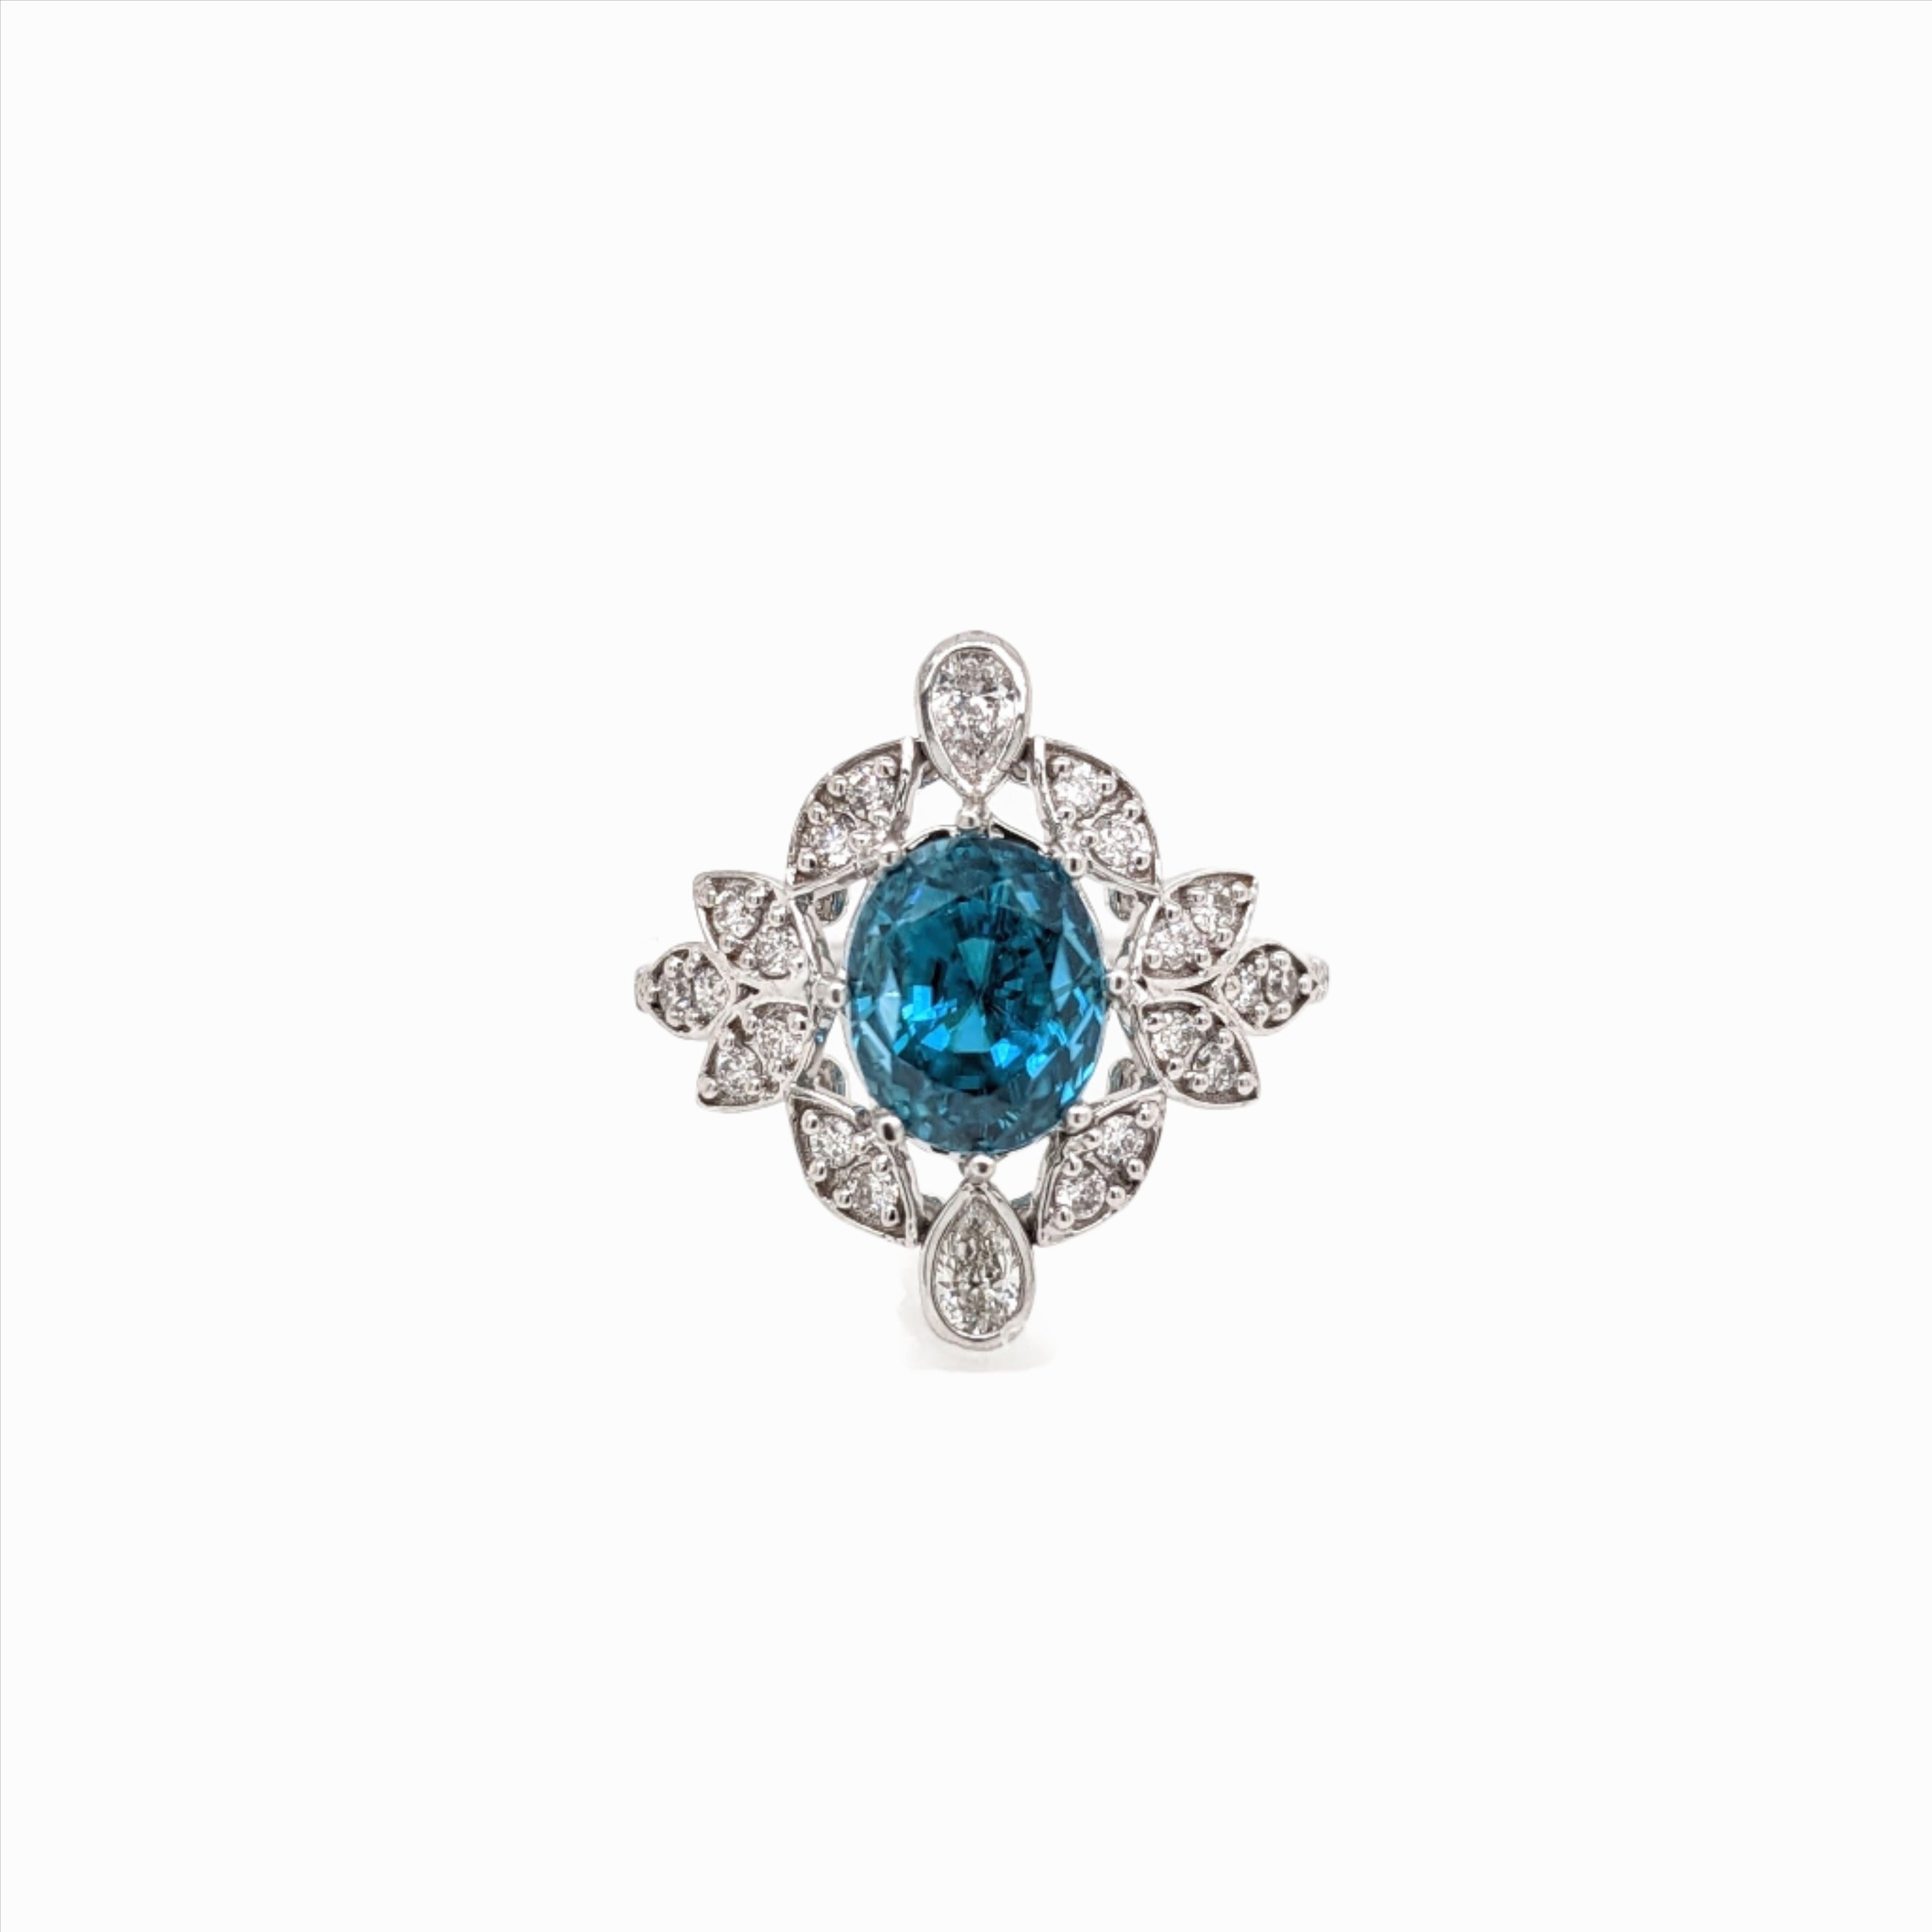 4.3ct Blue Zircon Ring w Natural Diamonds in Solid 14K White Gold Oval 9x7mm